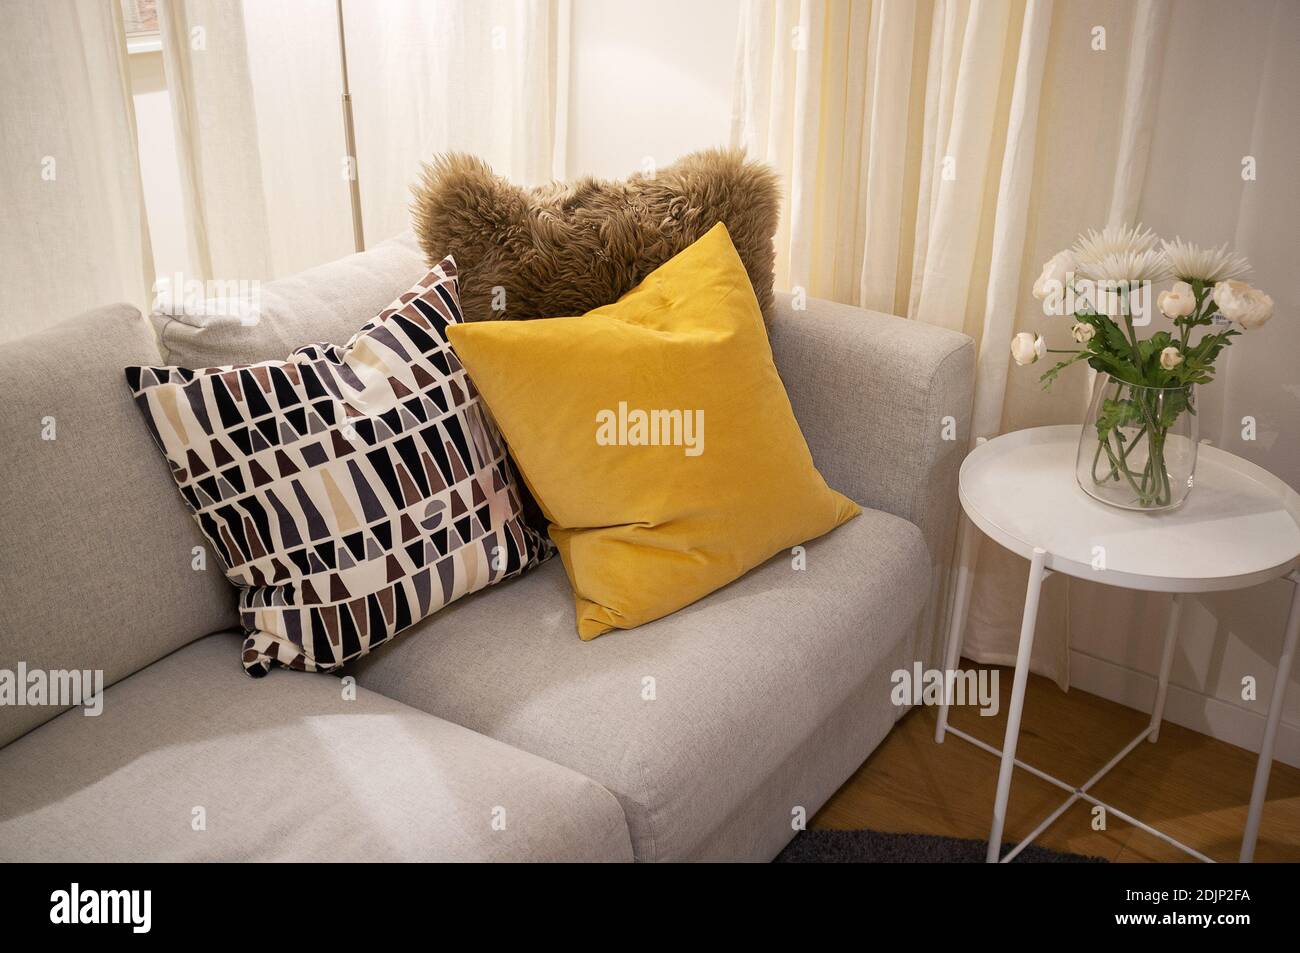 Cushions On Sofa By Vase At Home Stock Photo